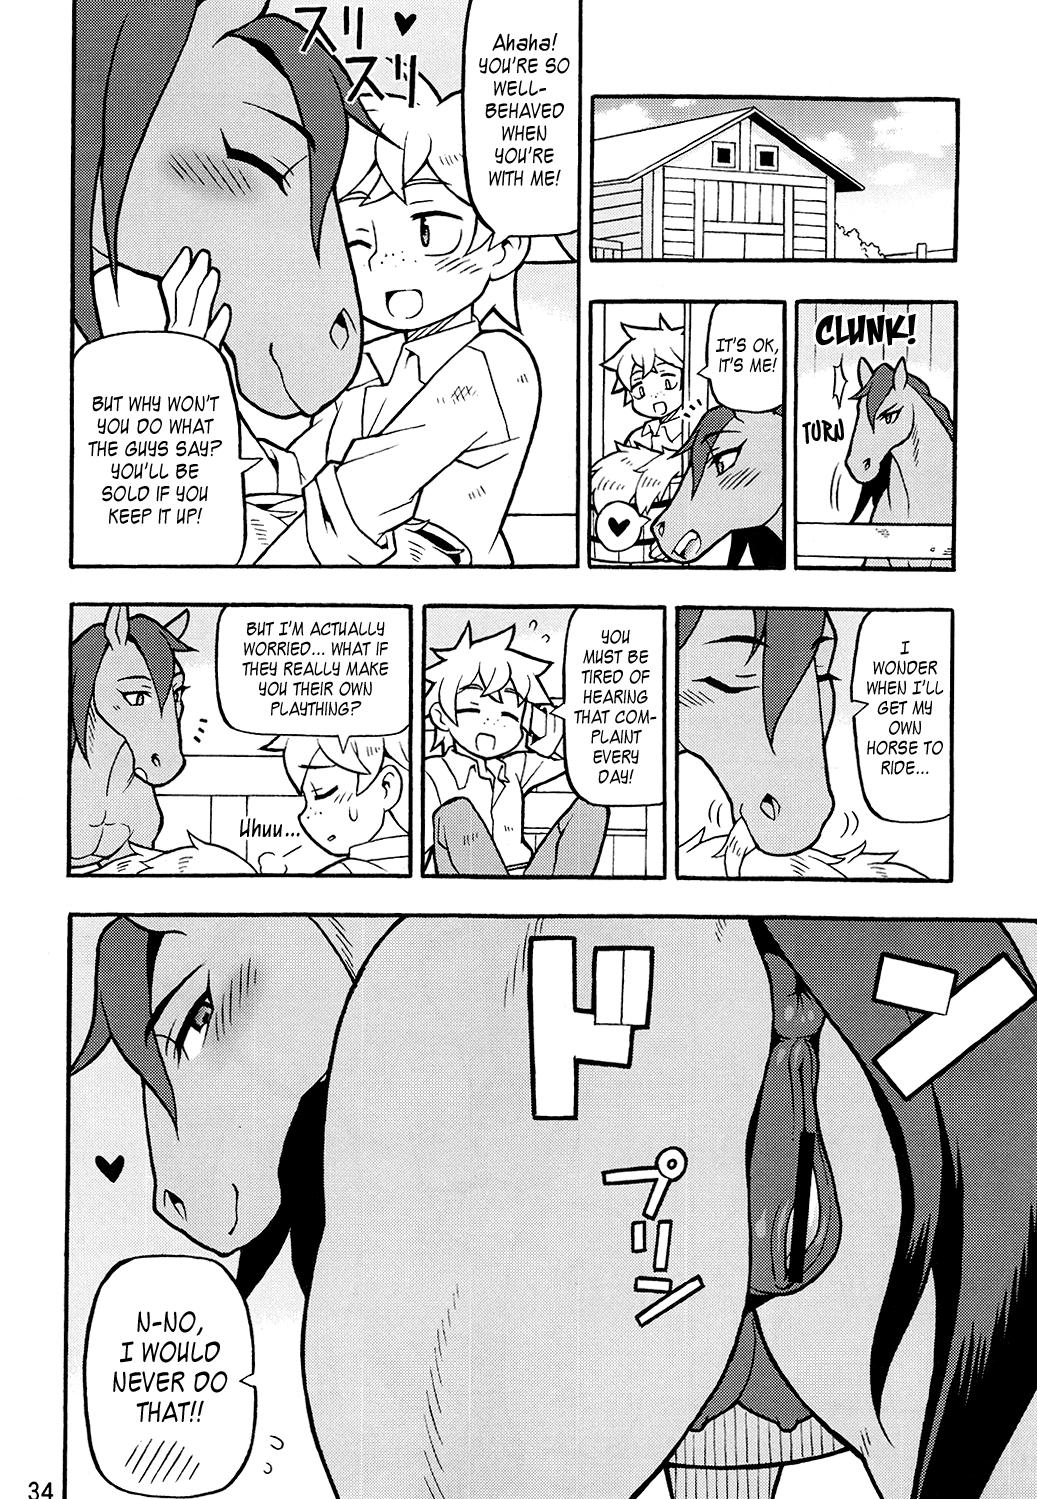 Chubby Mare Holic 4 Kemolover EX Ch. 4, 8, 10-11, 19, 29 Desi - Page 4